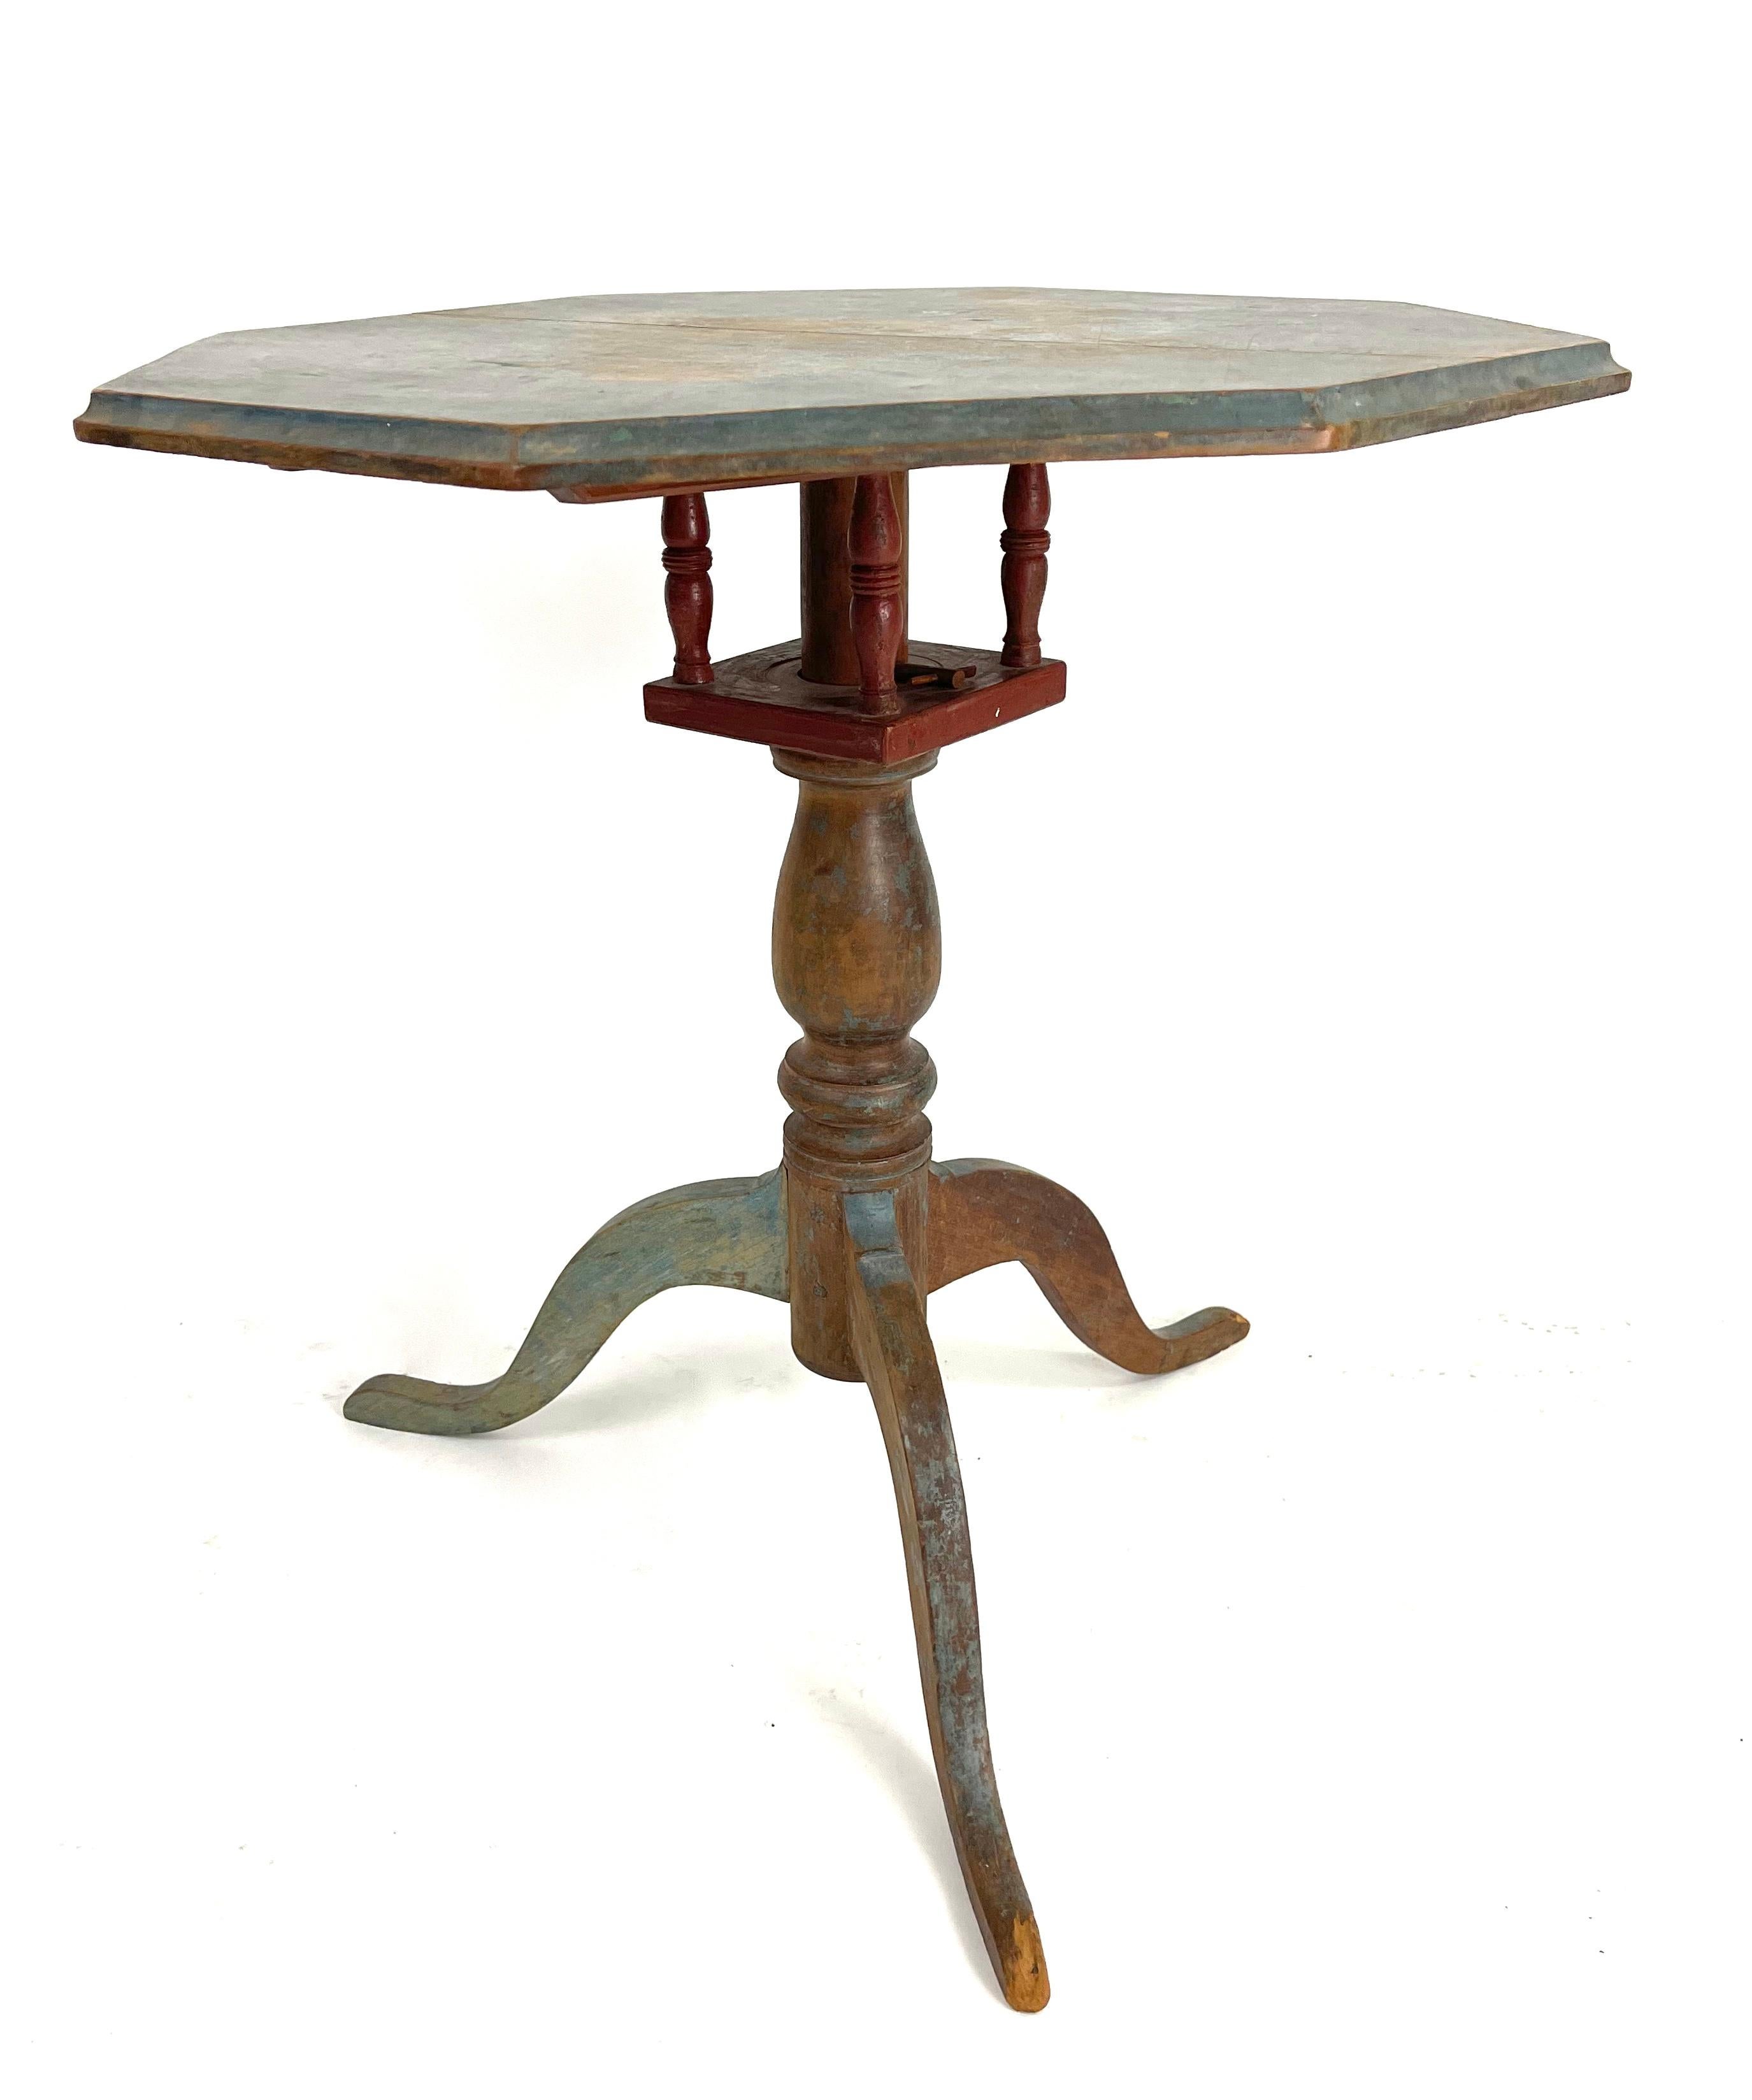 An 18th century American painted tea table in wonderful old, chalky blue paint, the octagonal top with molded edge over a birdcage and baluster-turned standard supported by a tripod base. Old blue paint over old red paint. Beautiful dry finish and